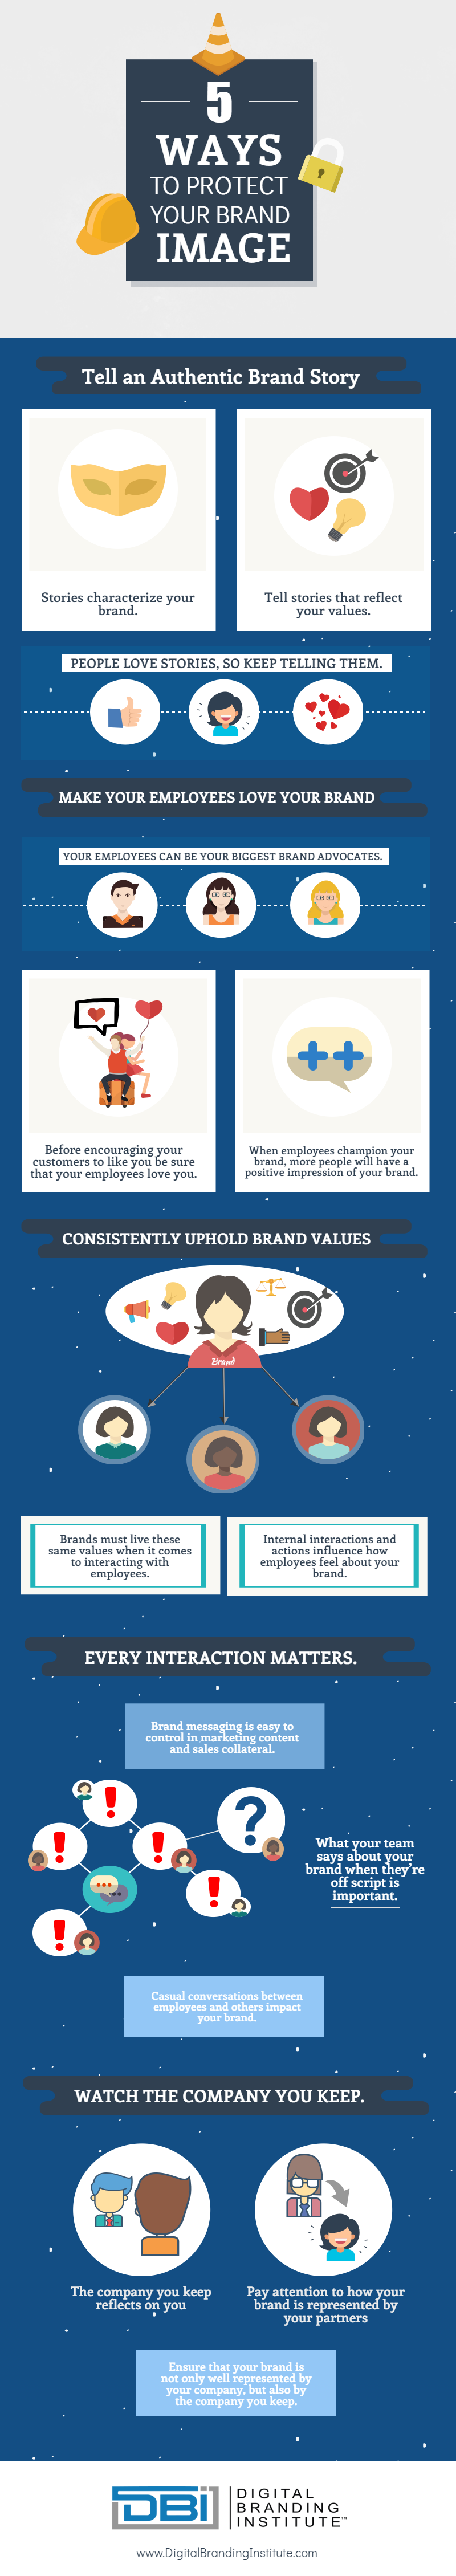 5 ways to protect your brand image